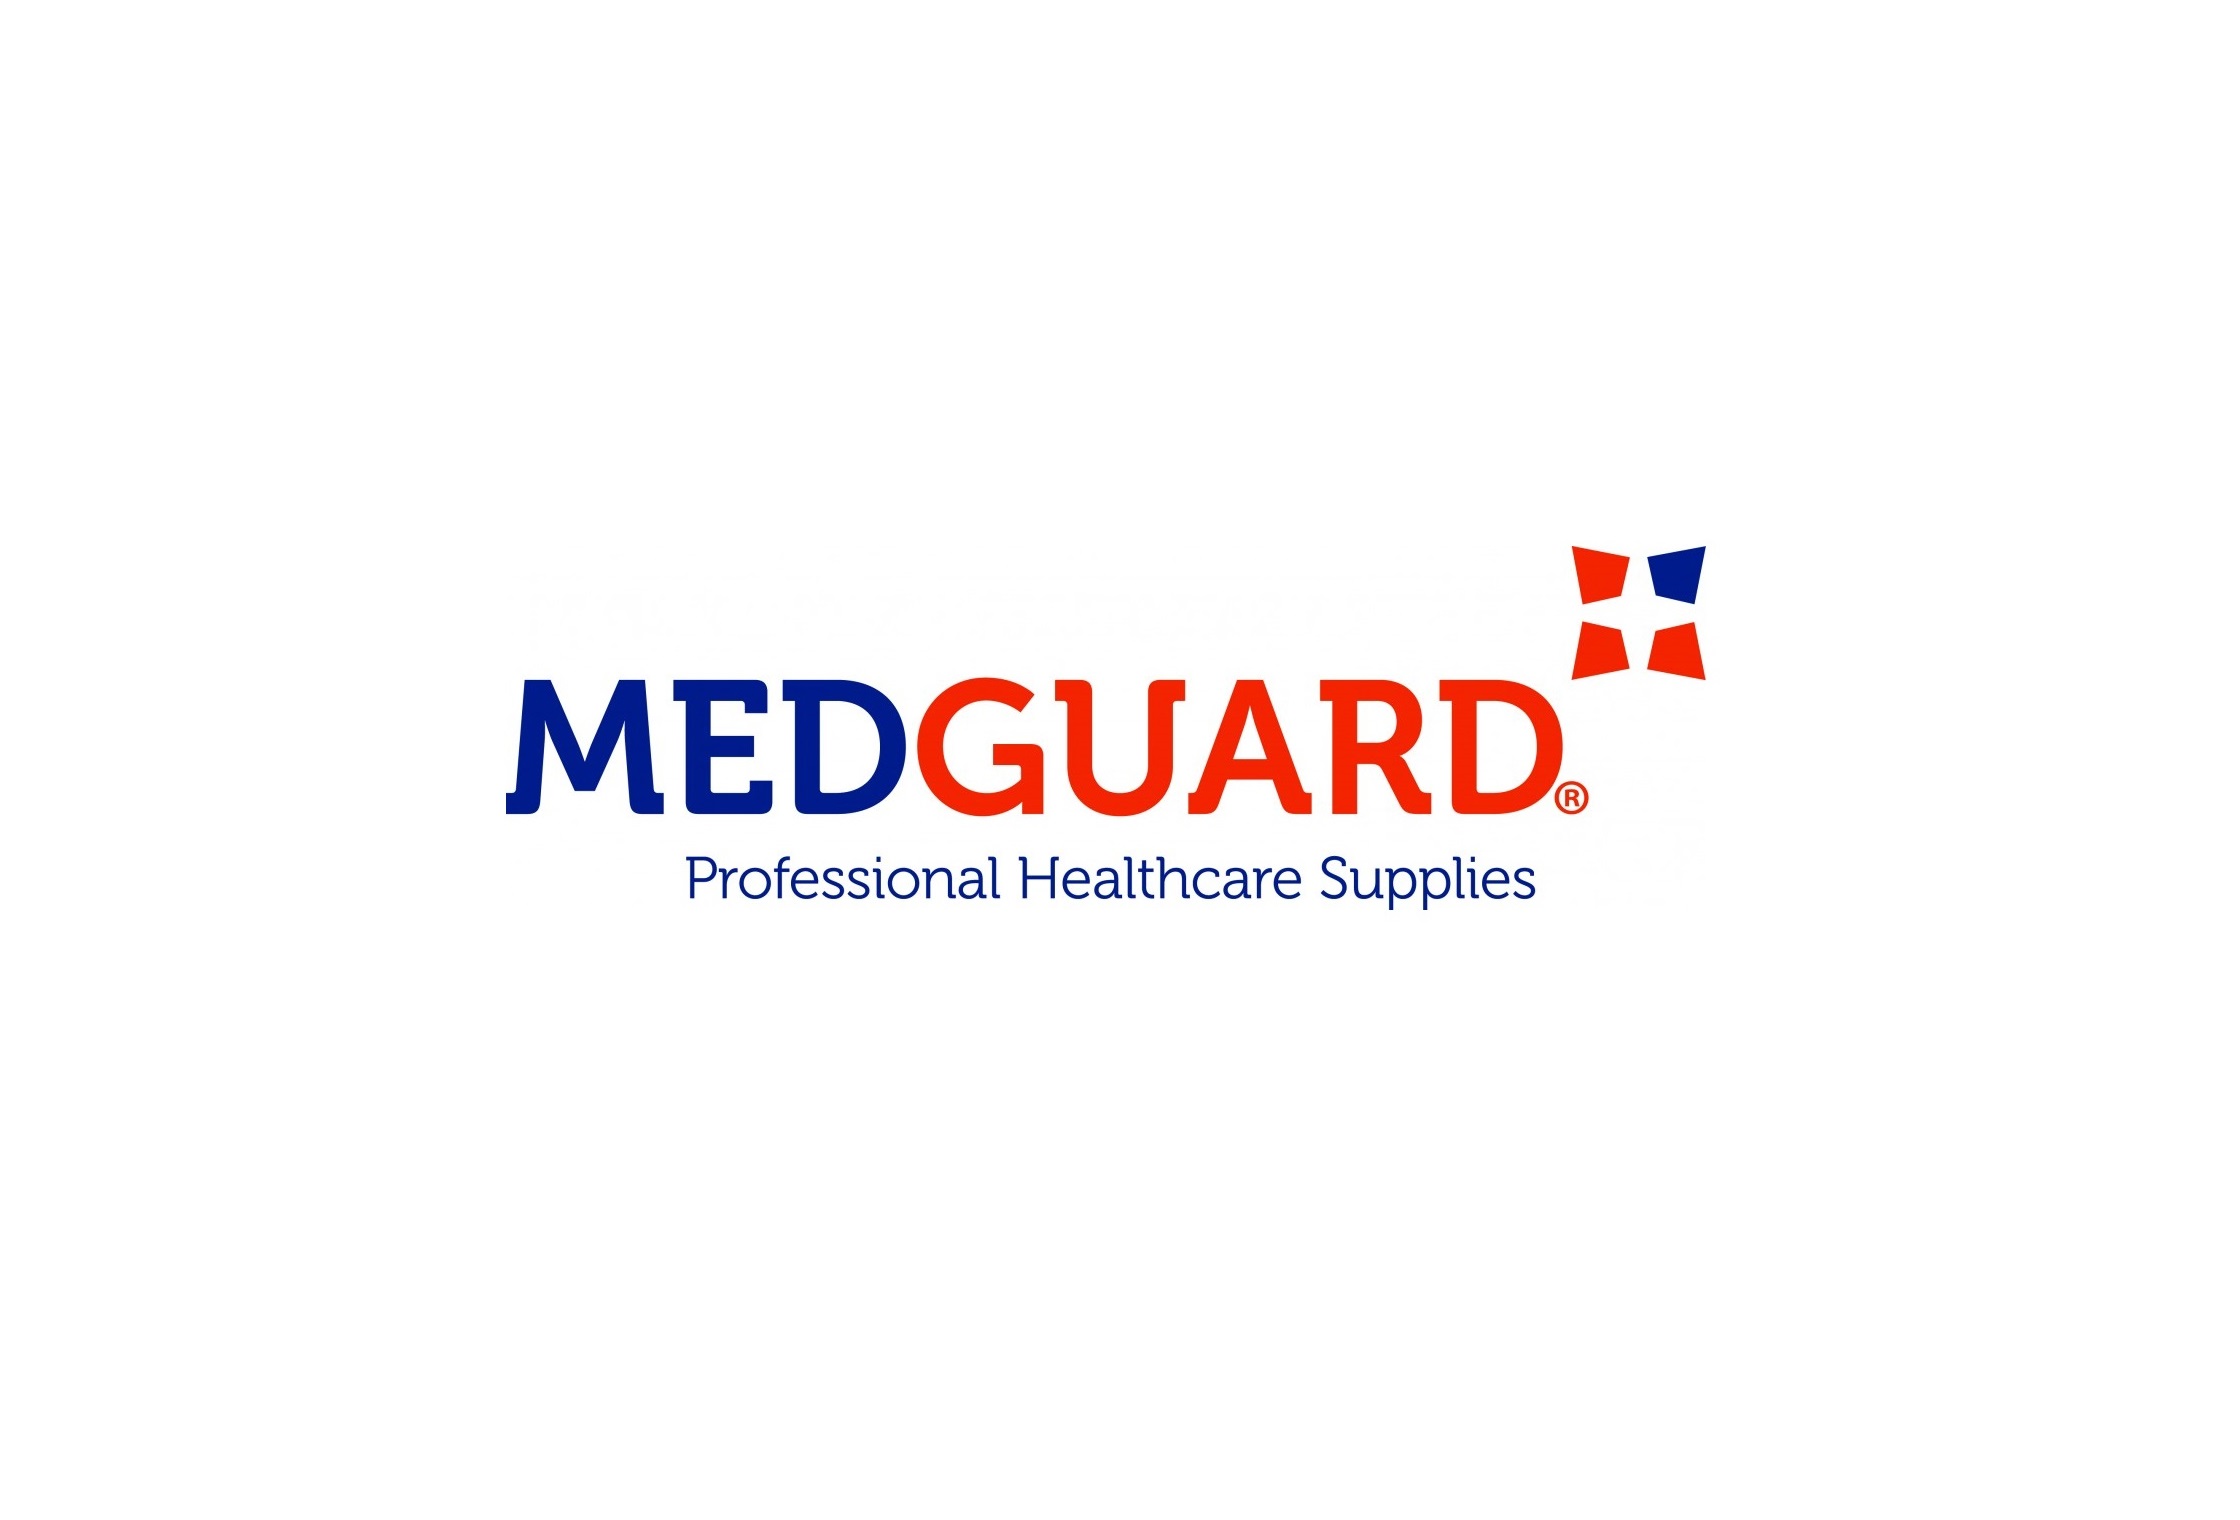 Medguard Professional Healthcare Supplies